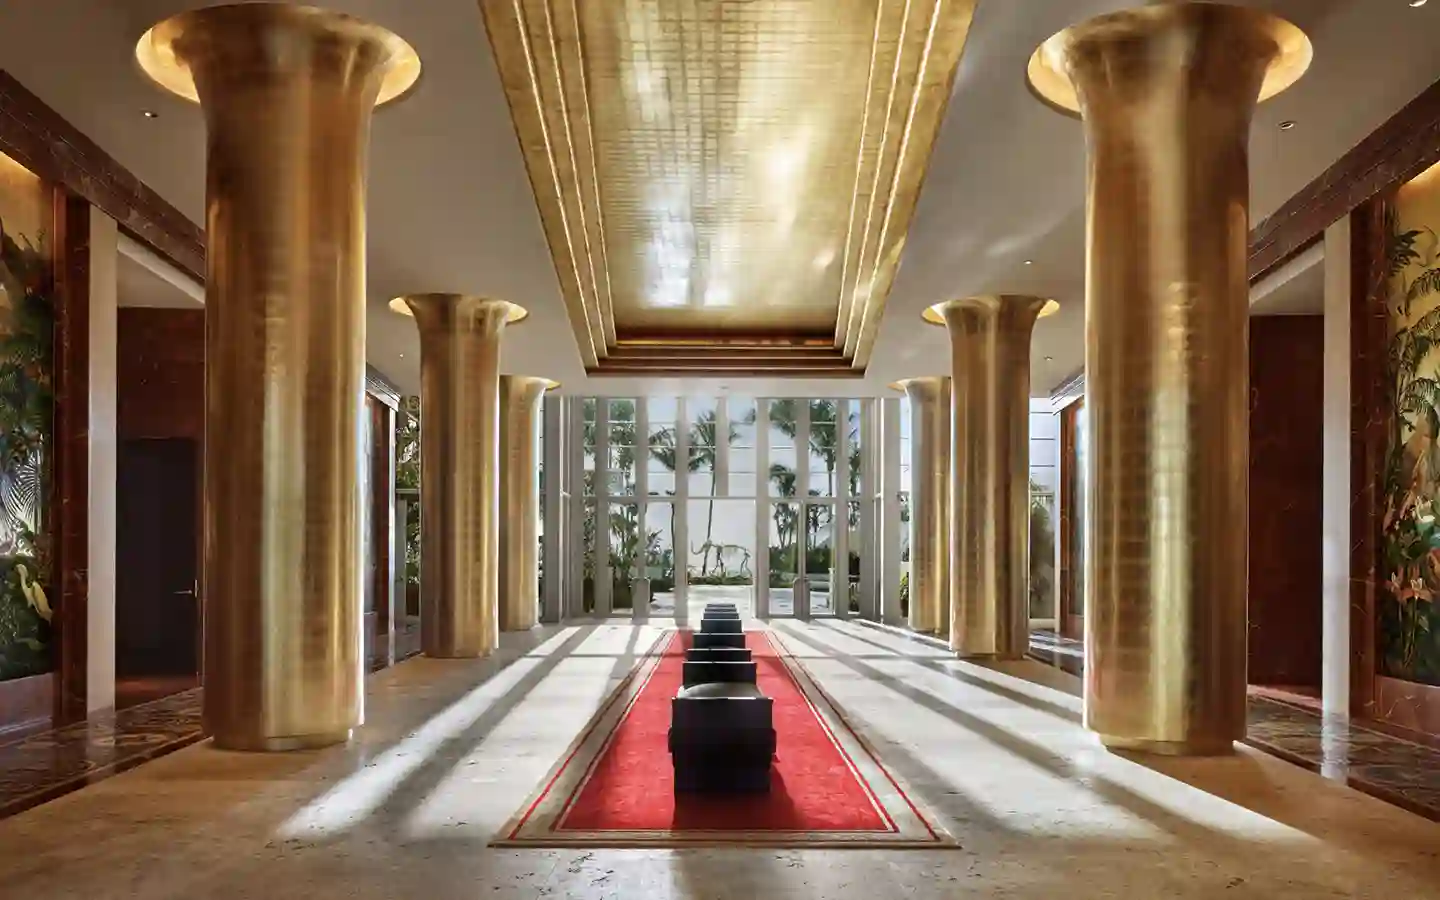 a hallway with columns and a red rug